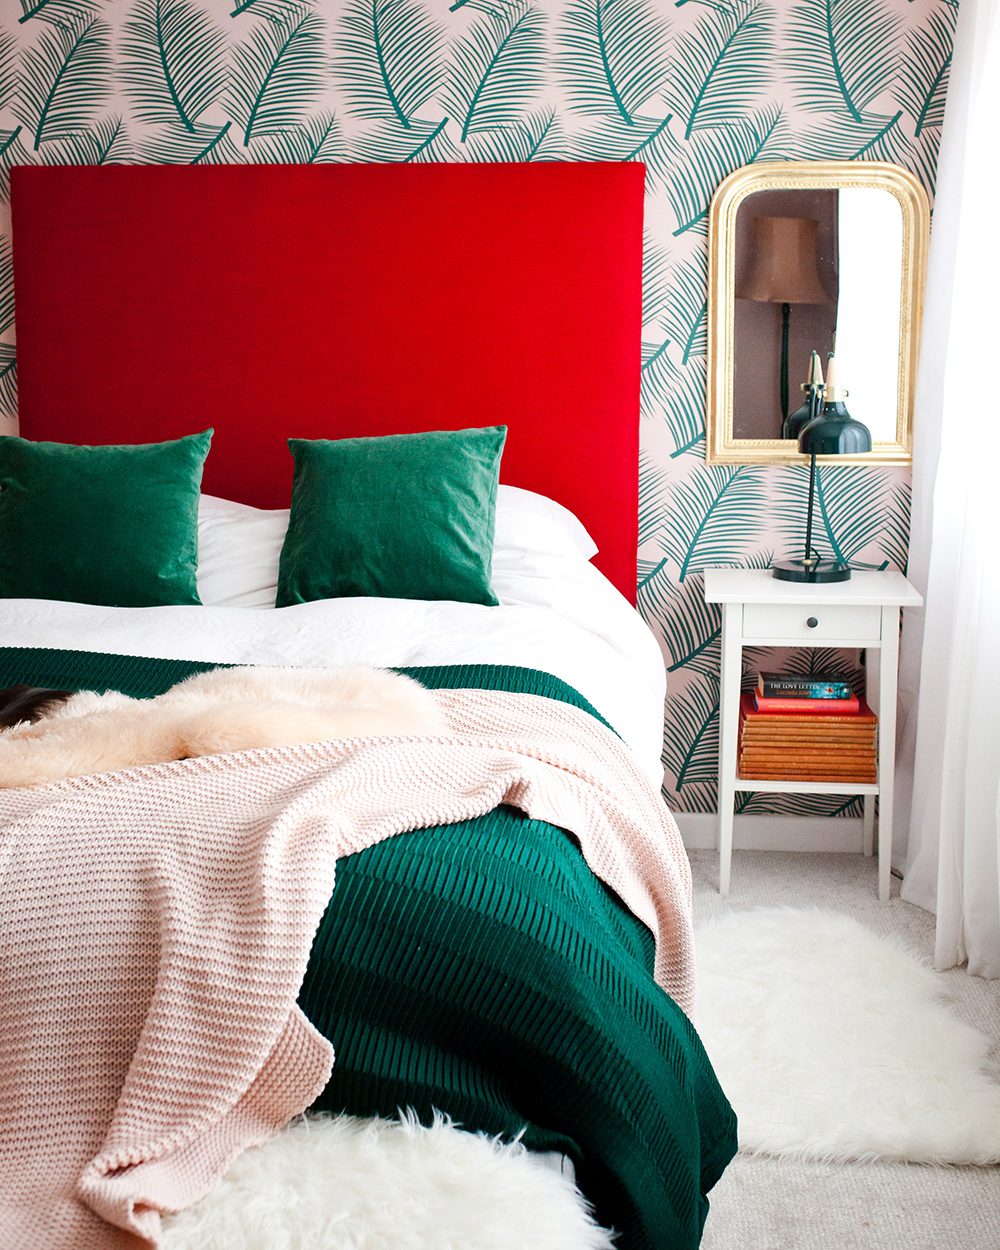 Red and green colour scheme / bedroom decor